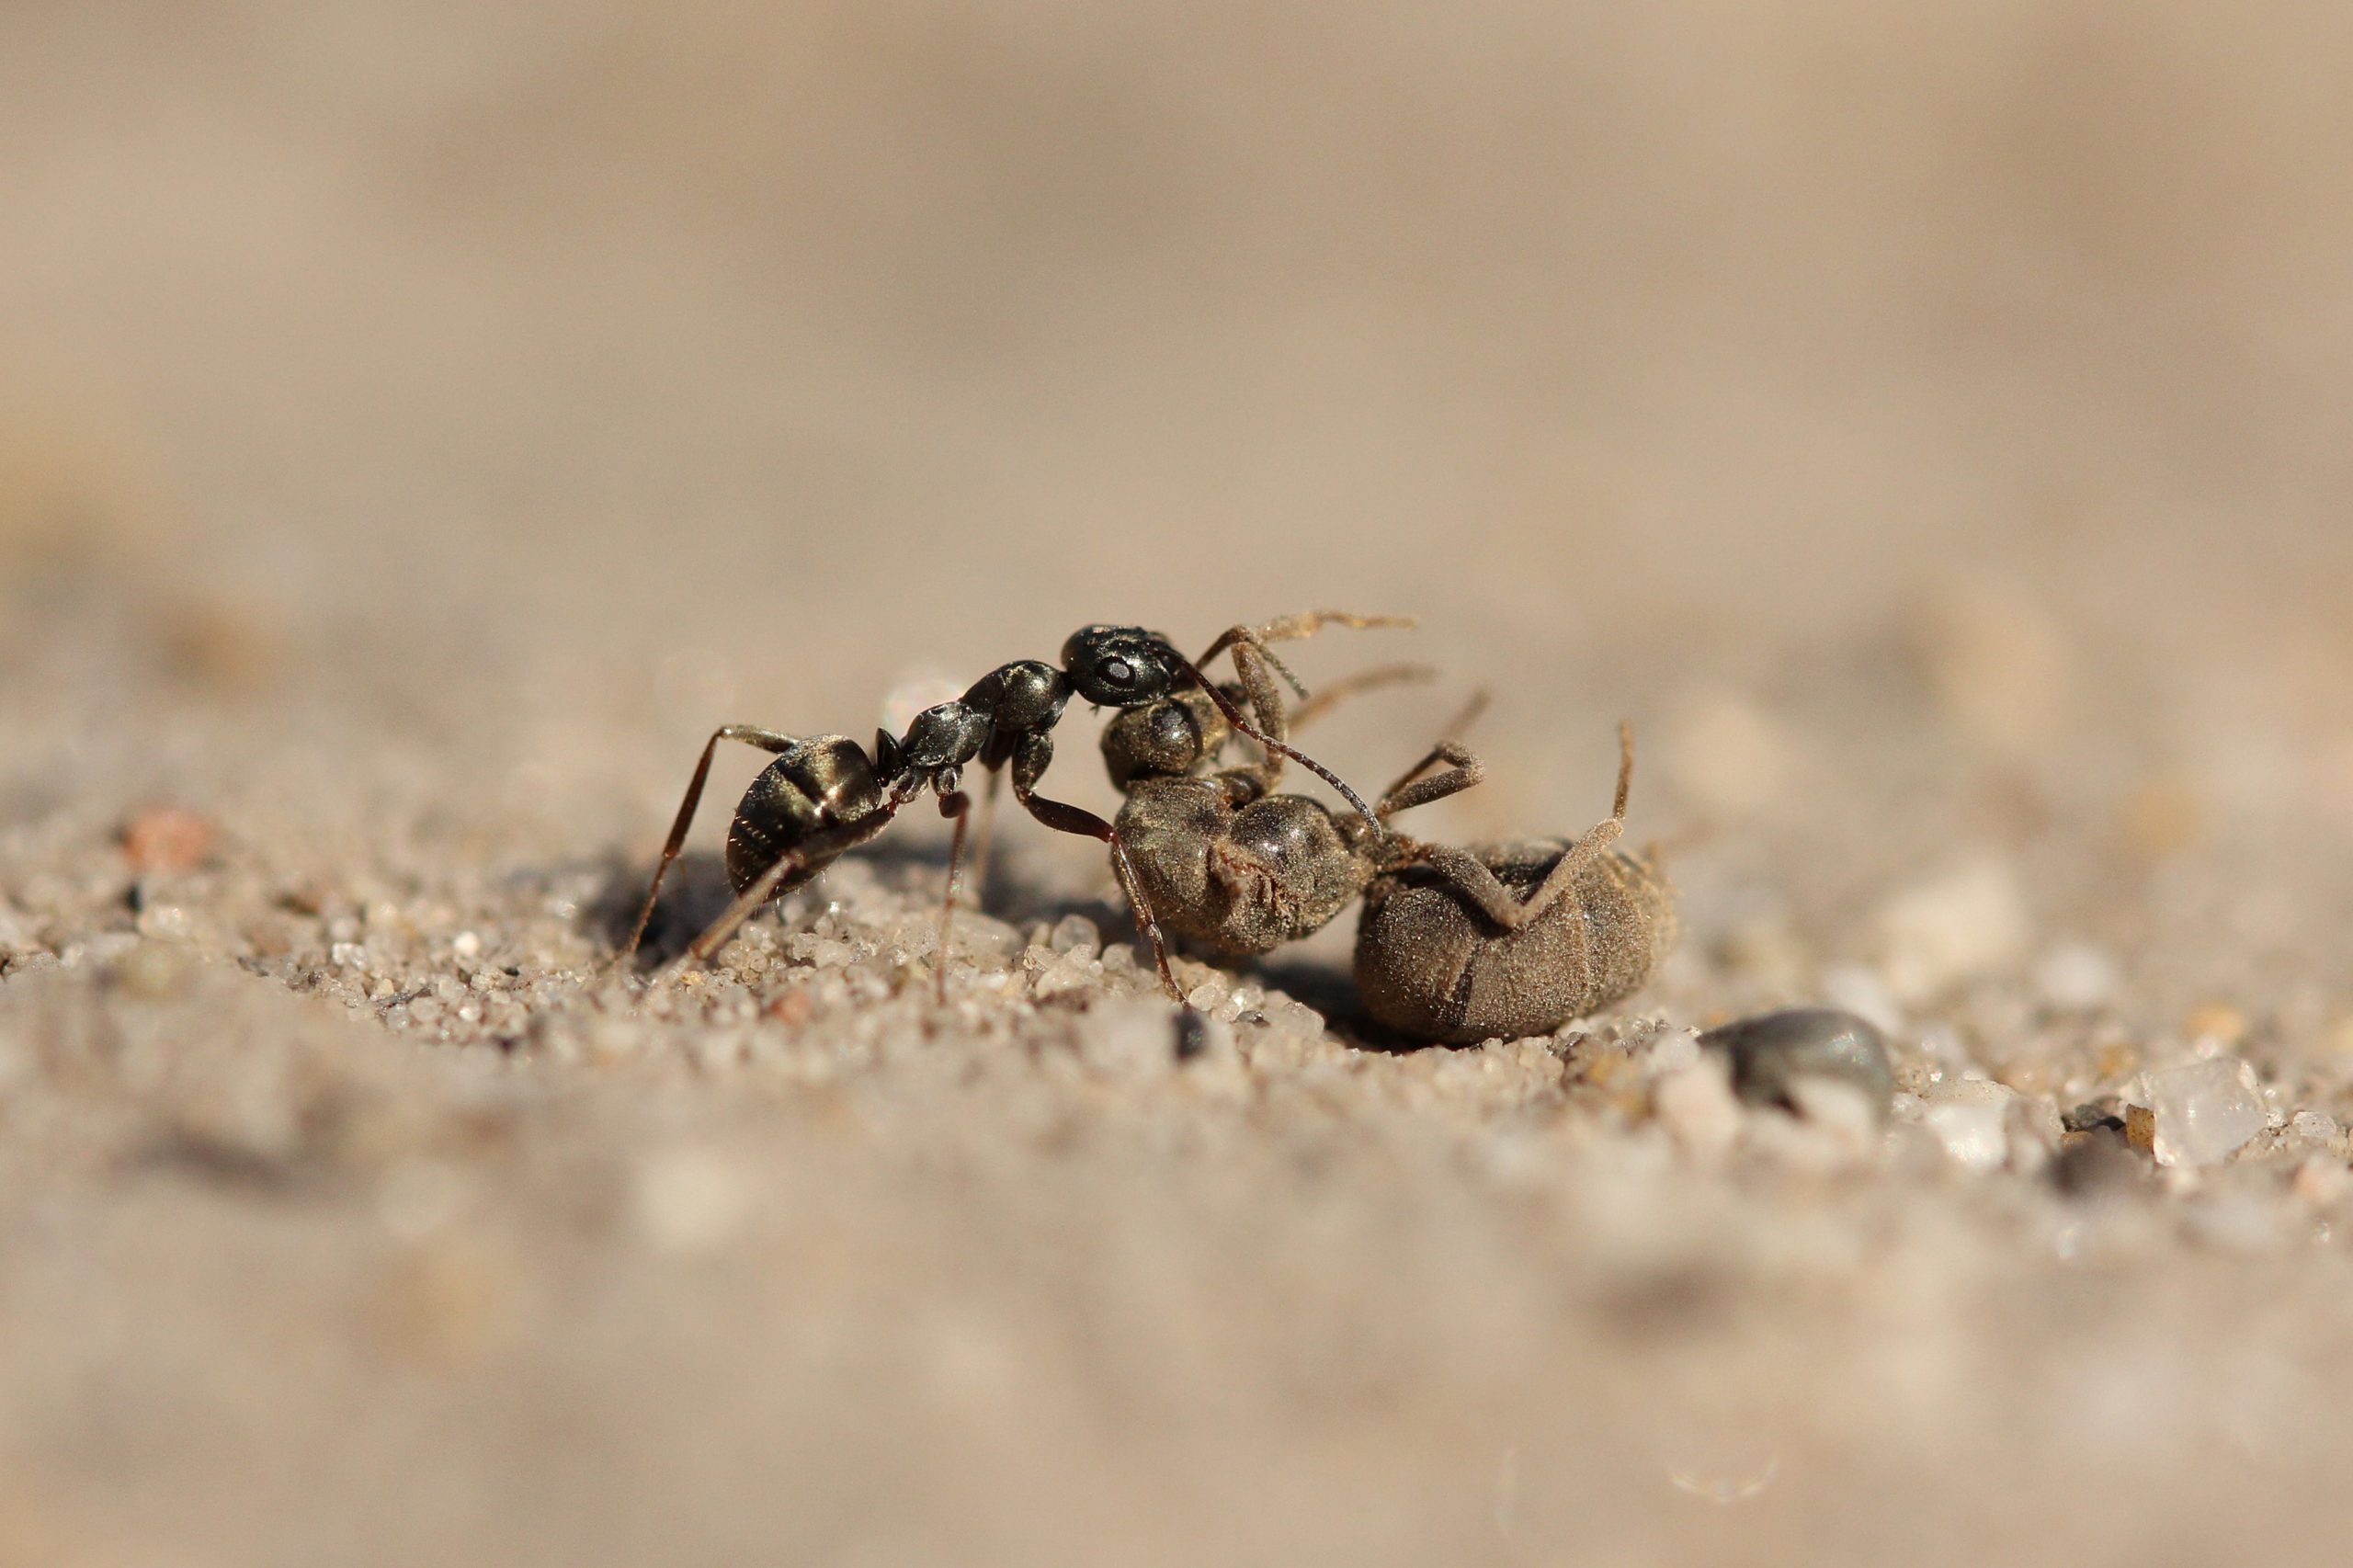 Western Honey bee, Apis mellifera, covered in dust, and an Ant